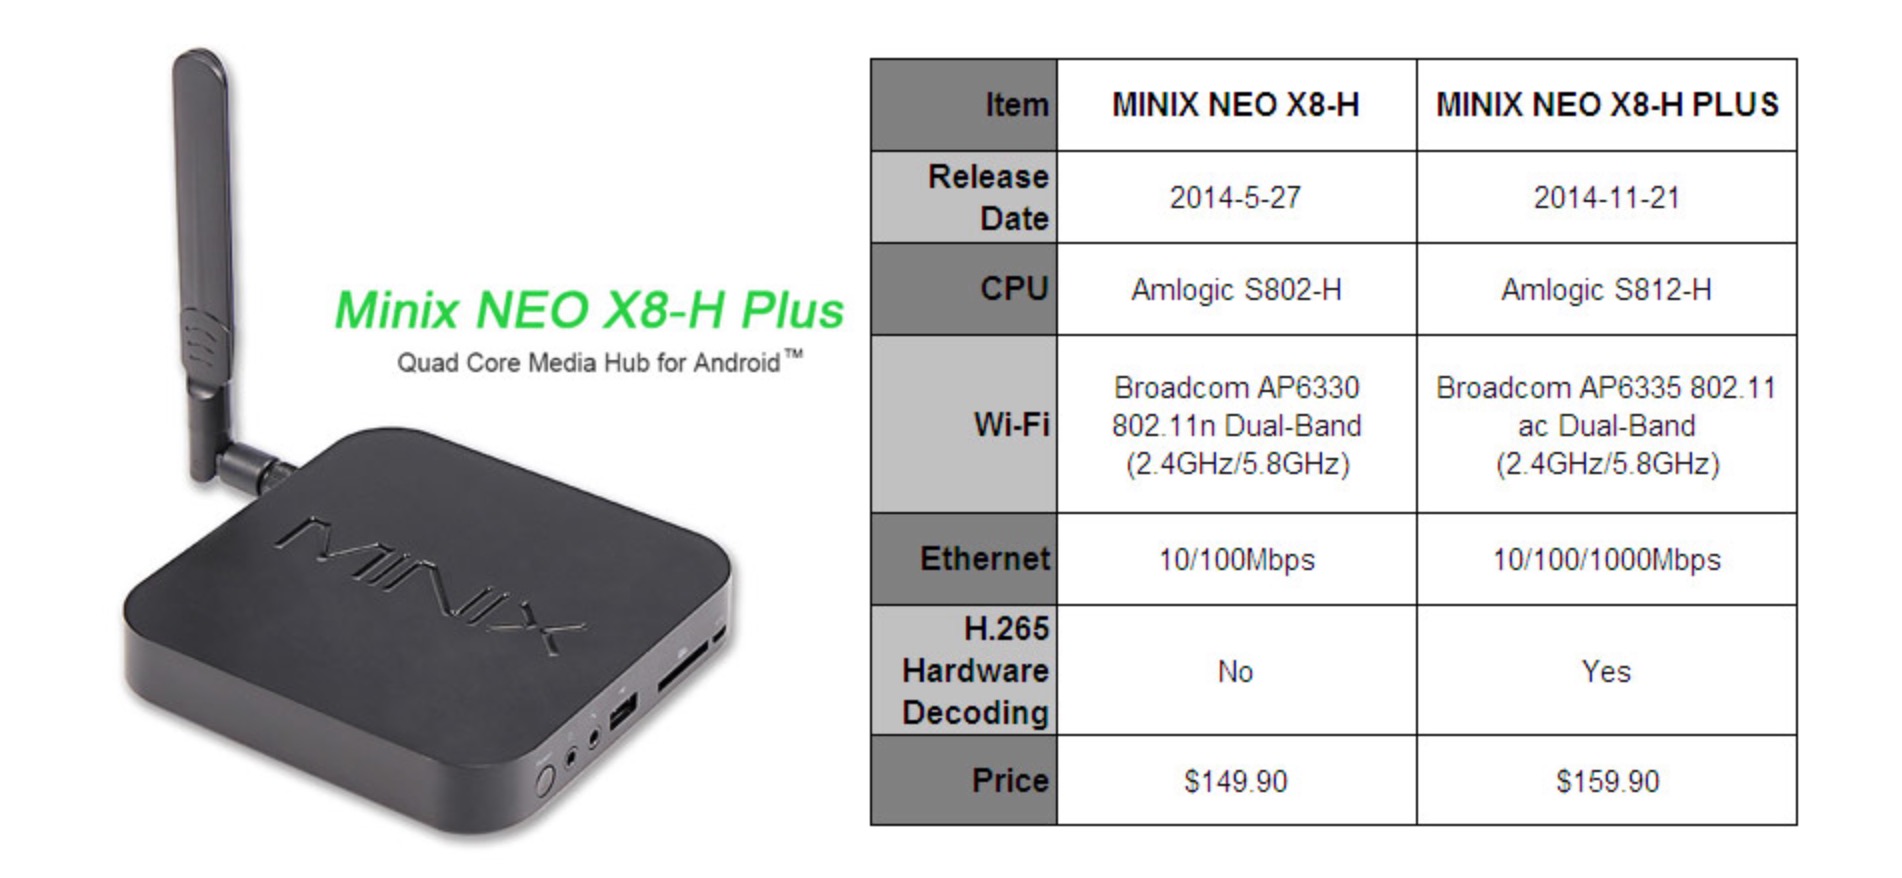 Minix Neo X8-H Plus Amlogic S812 Media Player Release, a little suddenly,  but a great product indeed -